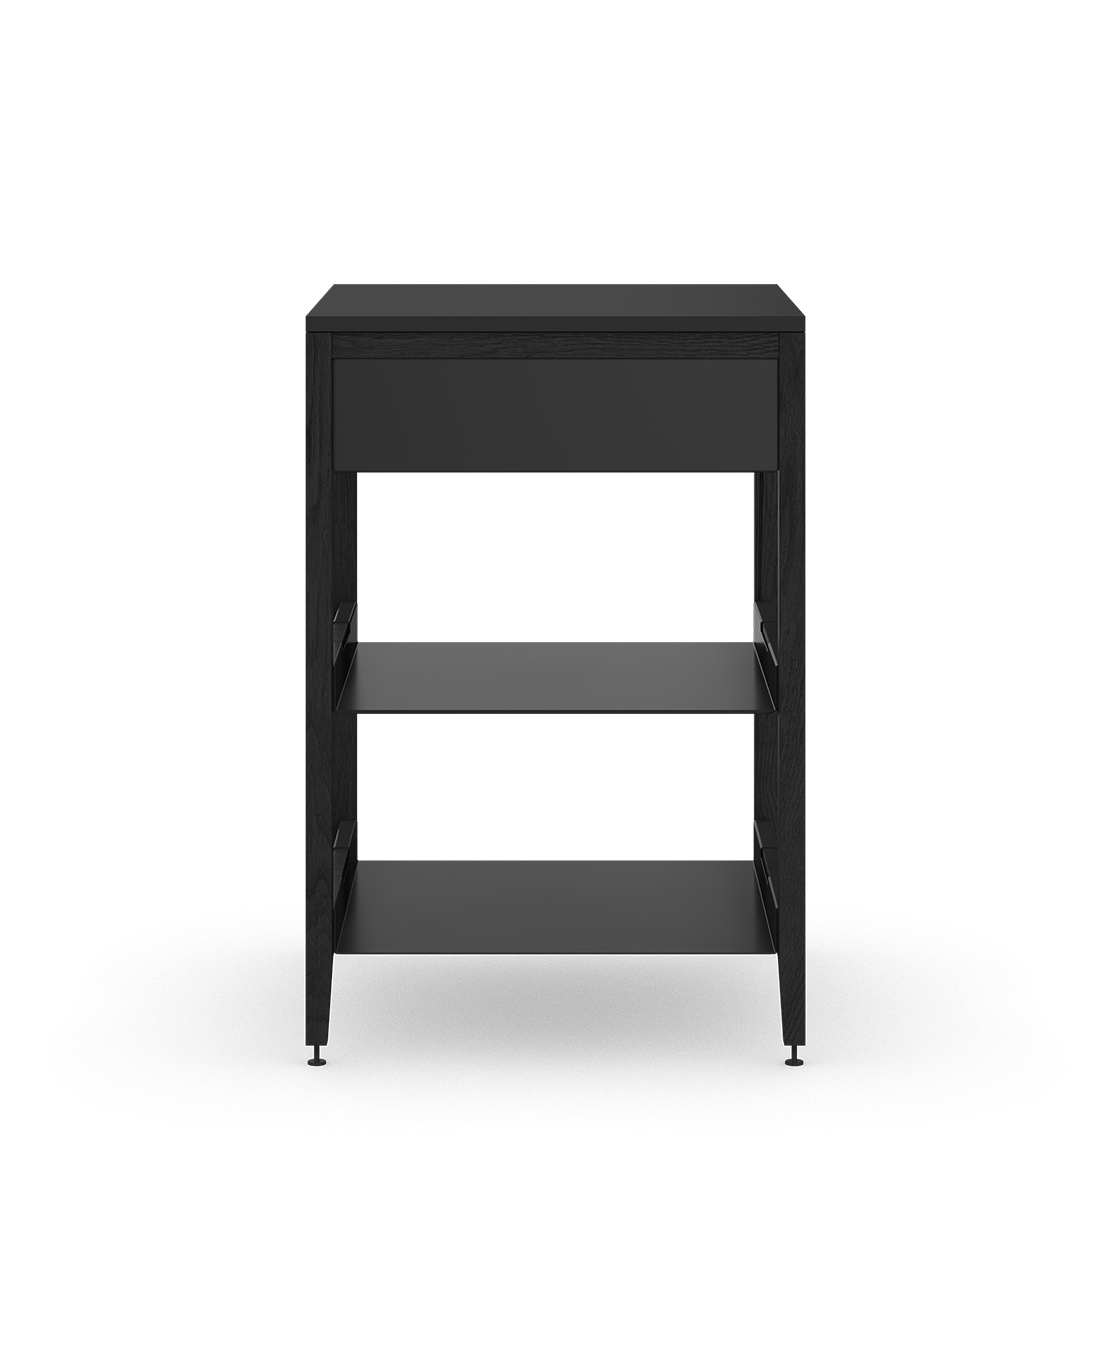 Coquo modular kitchen corner cabinet in black stained oak, fix front + two wood shelves. 